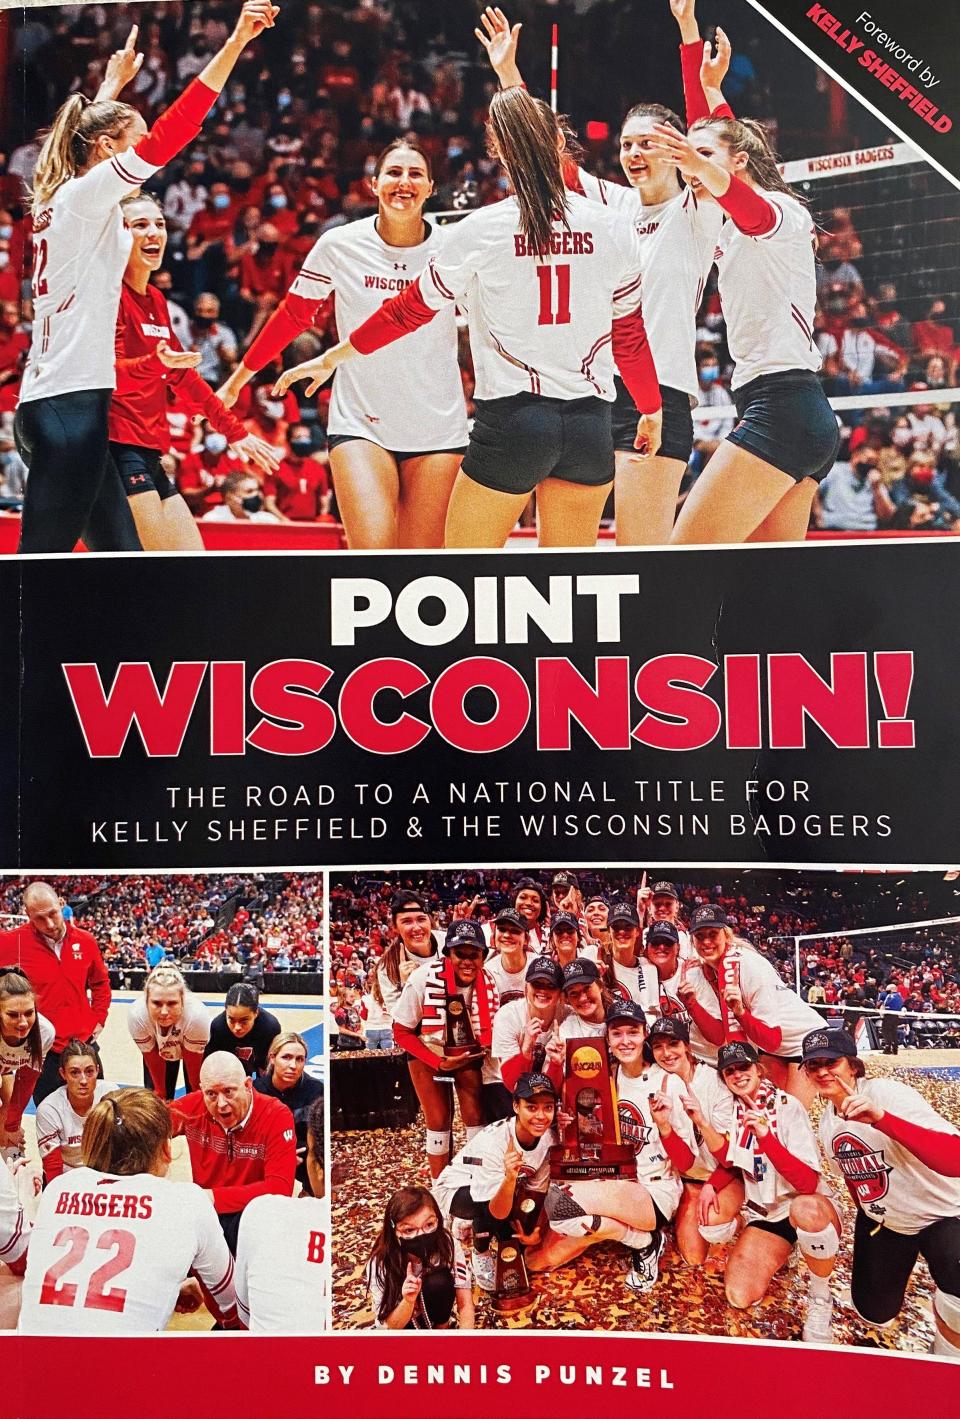 "Point Wisconsin" details the University of Wisconsin's 2021 national championship volleyball season and the rise of Badgers coach Kelly Sheffield.